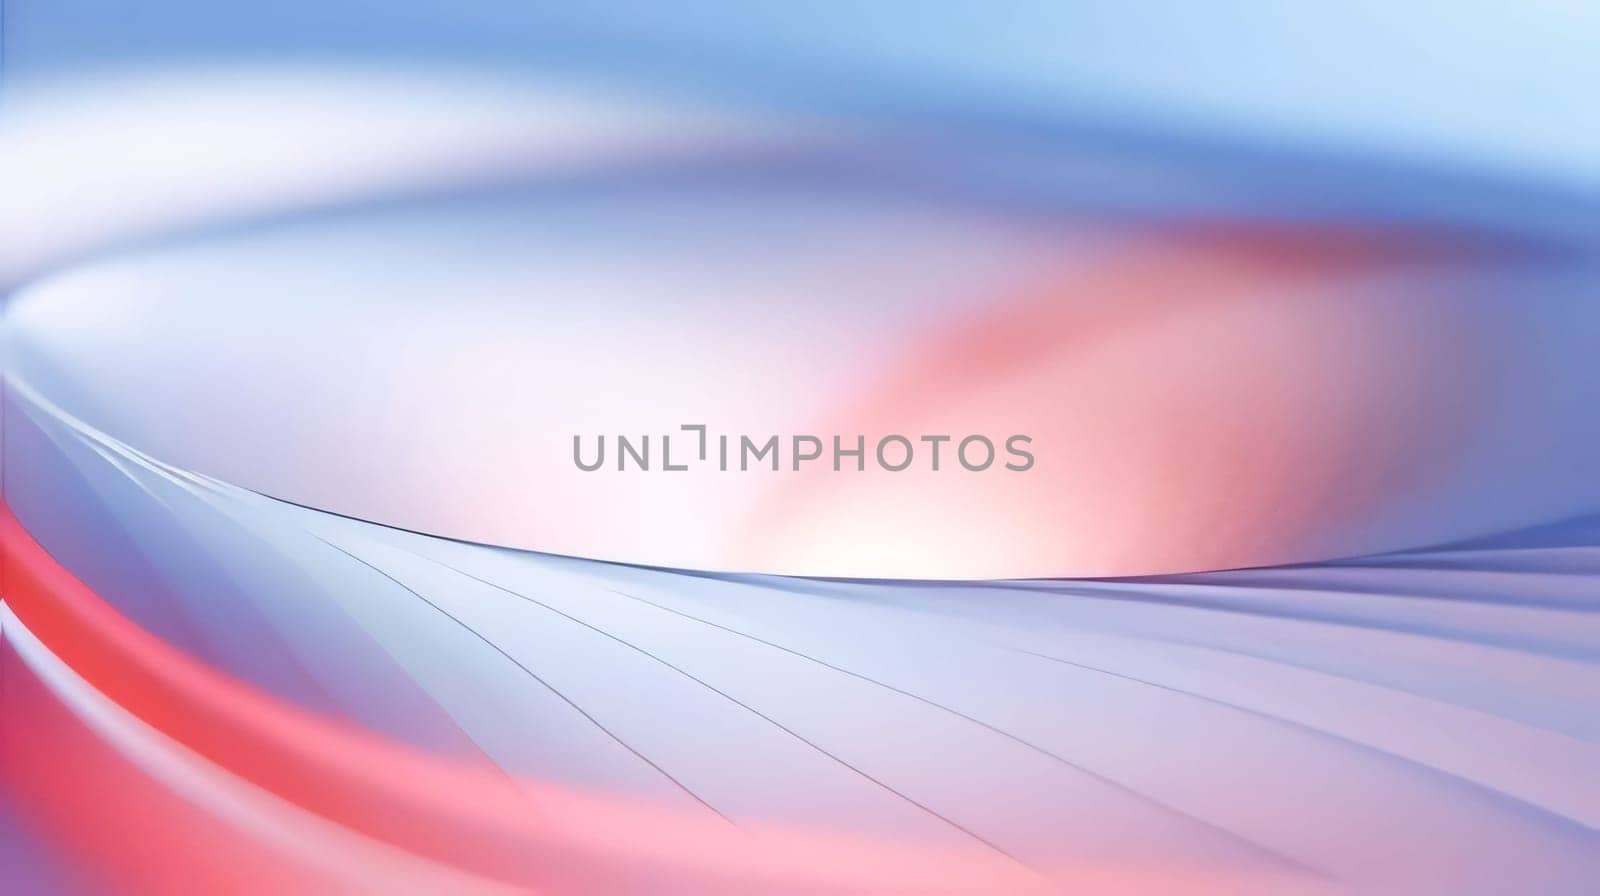 Abstract background design: abstract colorful background with curved lines in blue and pink colors.